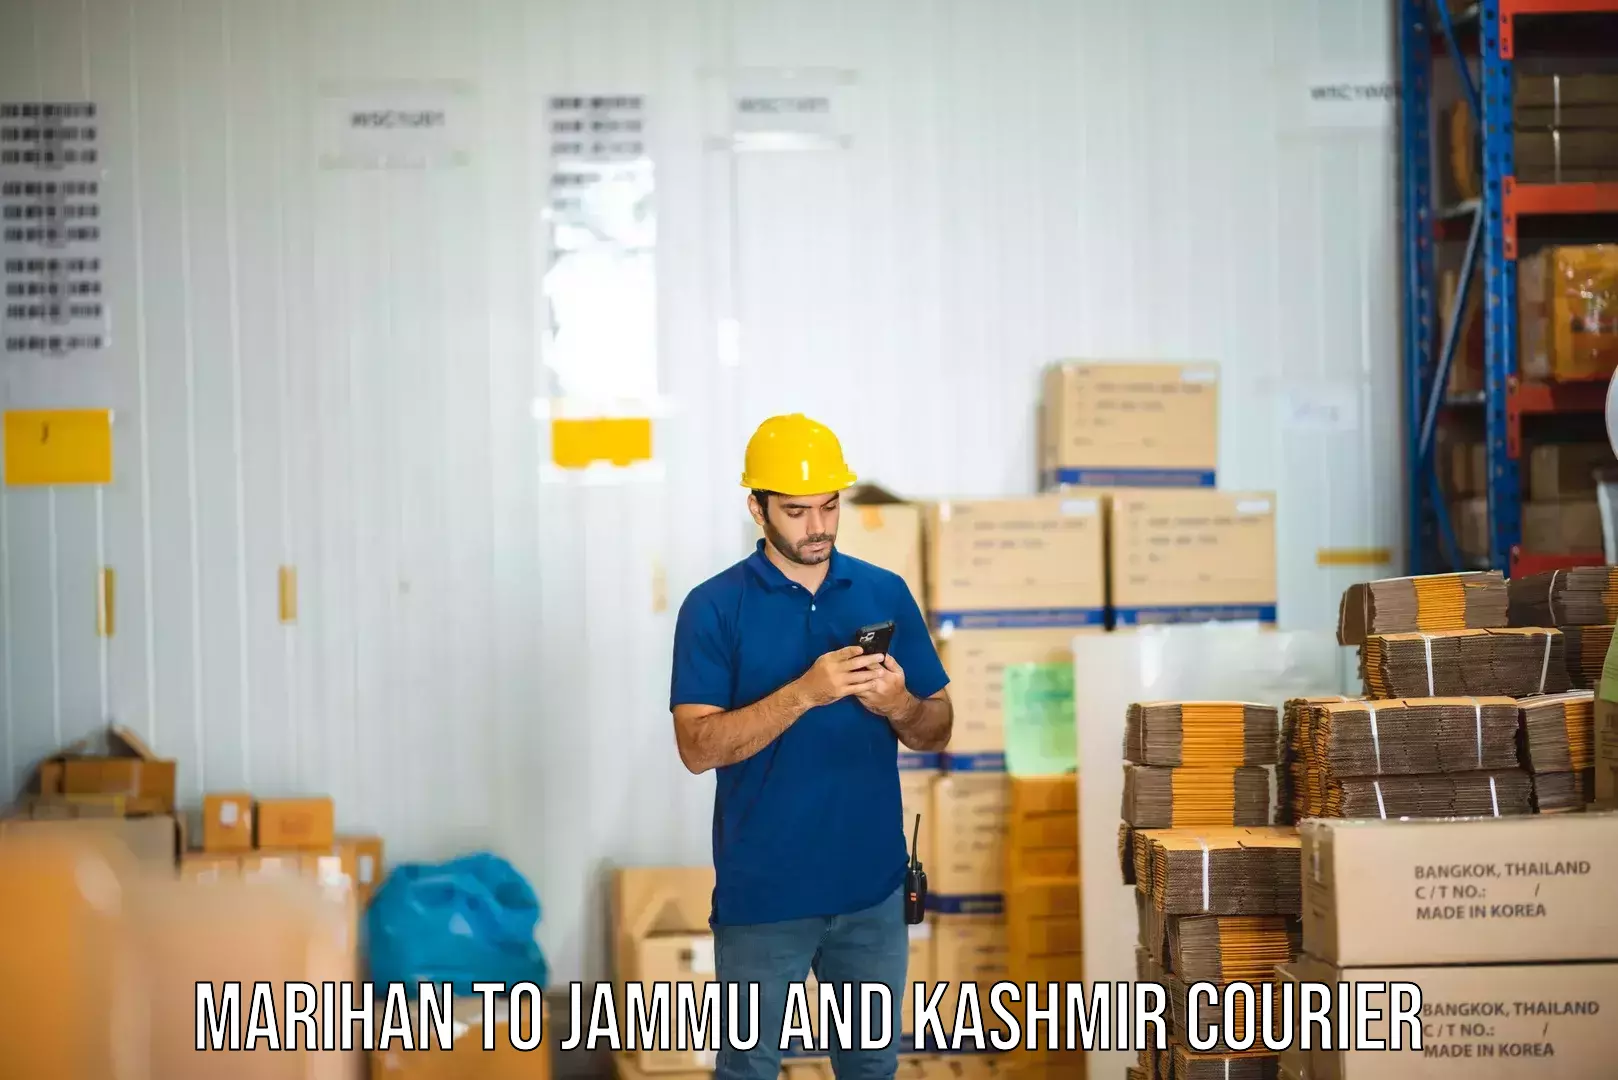 Courier services in Marihan to Baramulla